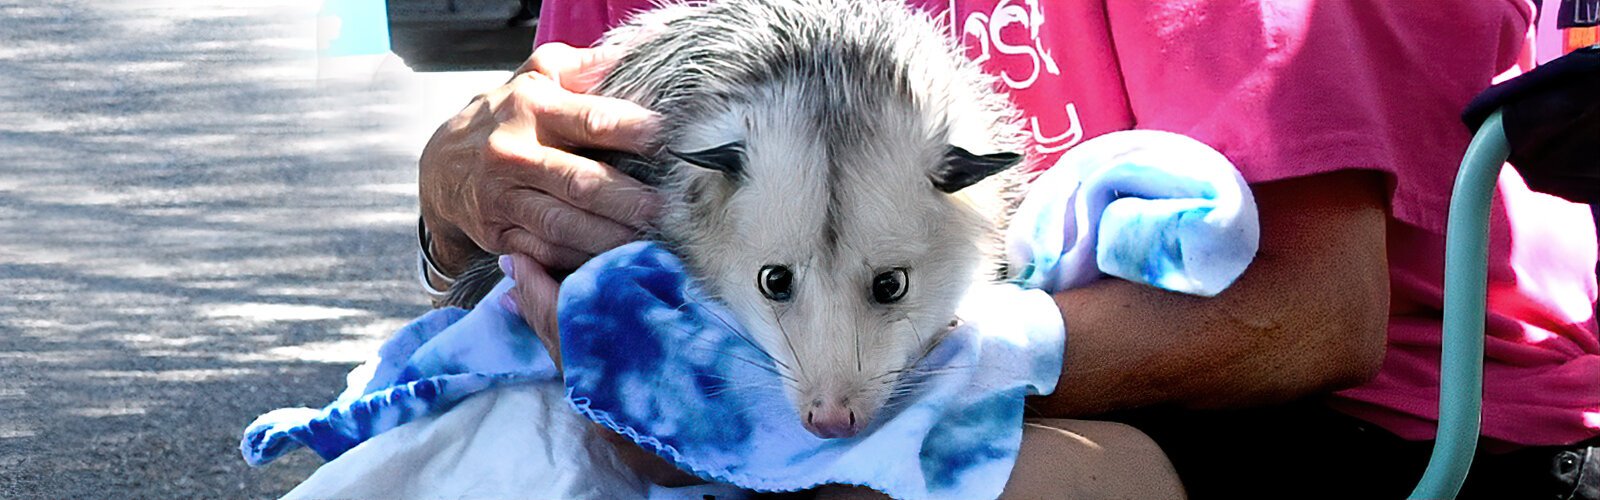 Meet "Priscilla the Possum," handled by Felicia Bangor of the Owls Nest Sanctuary for Wildlife. Not able to be released due to injuries, the small mammal has become an ambassador of the non-profit rehabilitation and wildlife rescue organization.